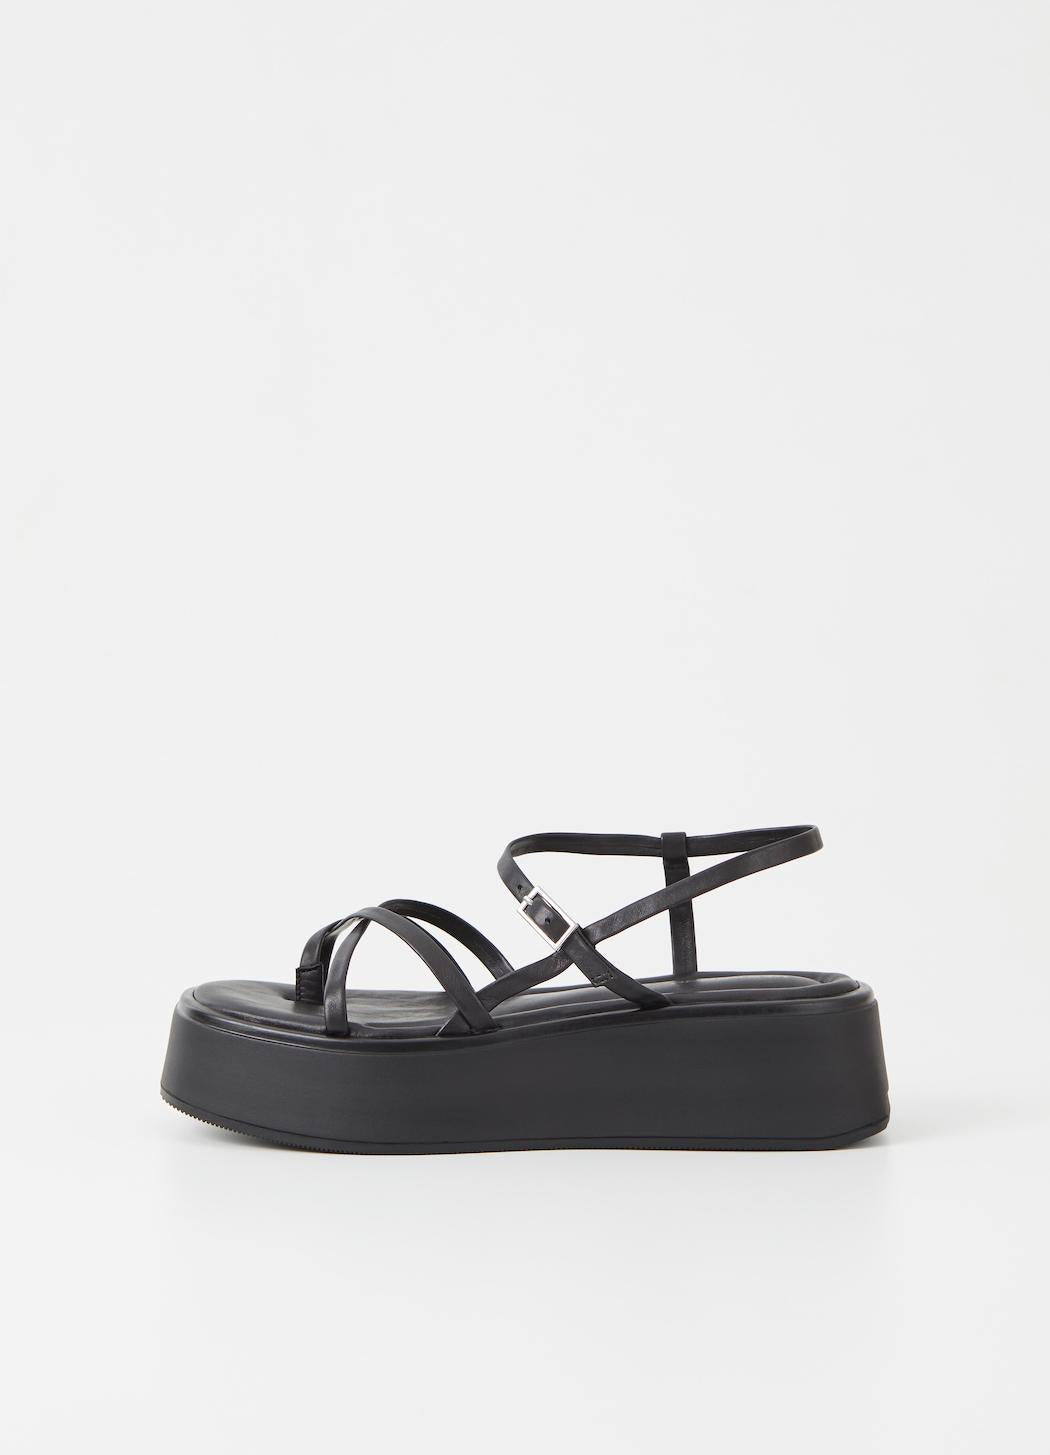 Vagabond Courtney strappy platform sandals | pipe and row boutique ...